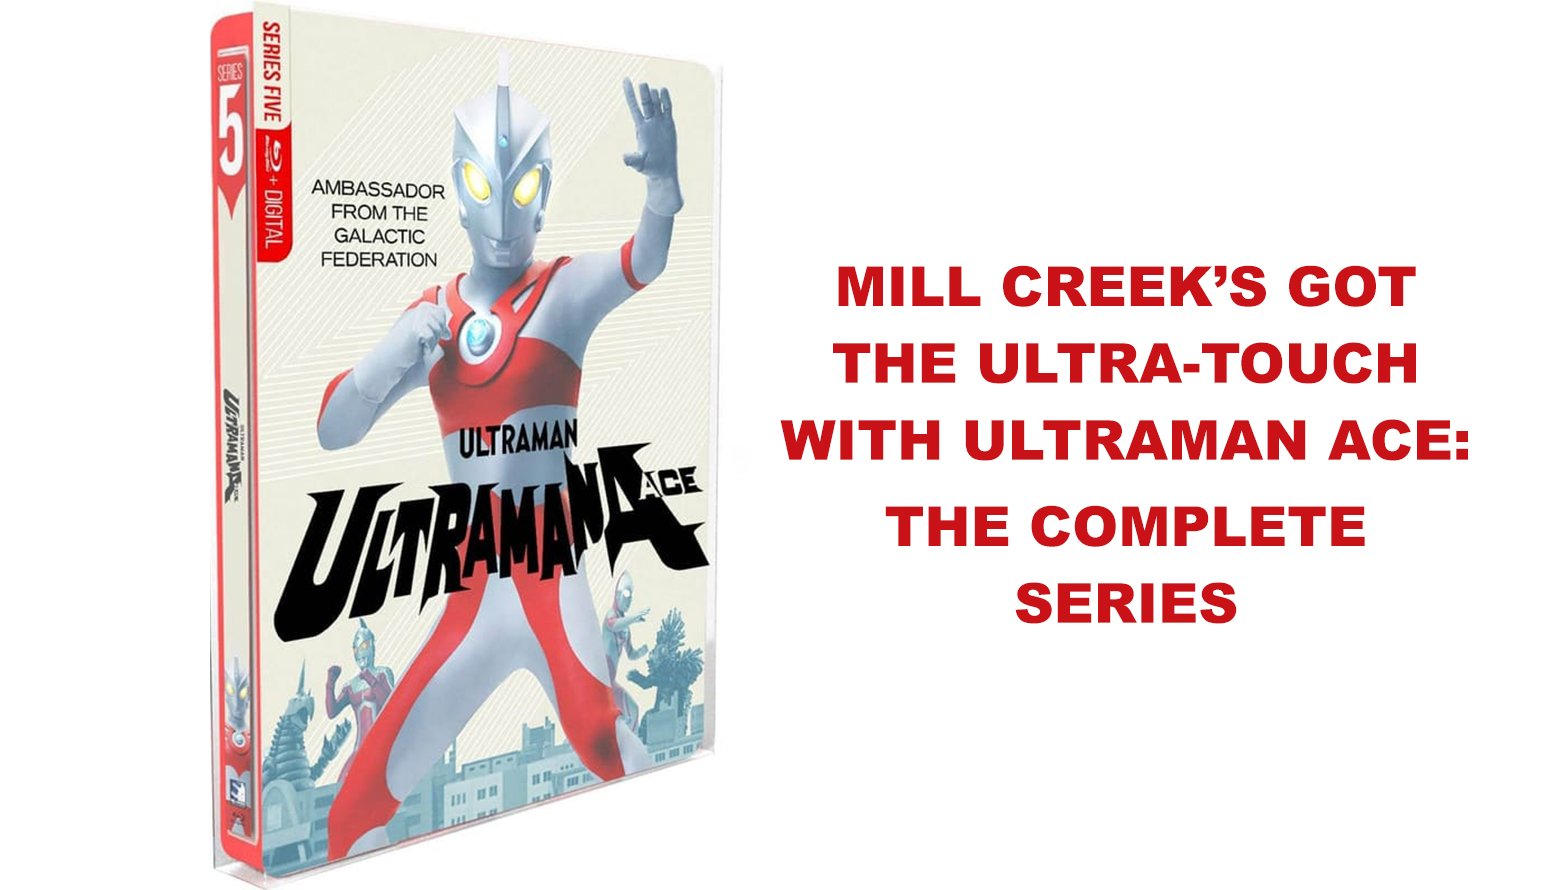 MILL CREEK’S GOT THE ULTRA-TOUCH WITHULTRAMAN ACE: THE COMPLETE SERIES